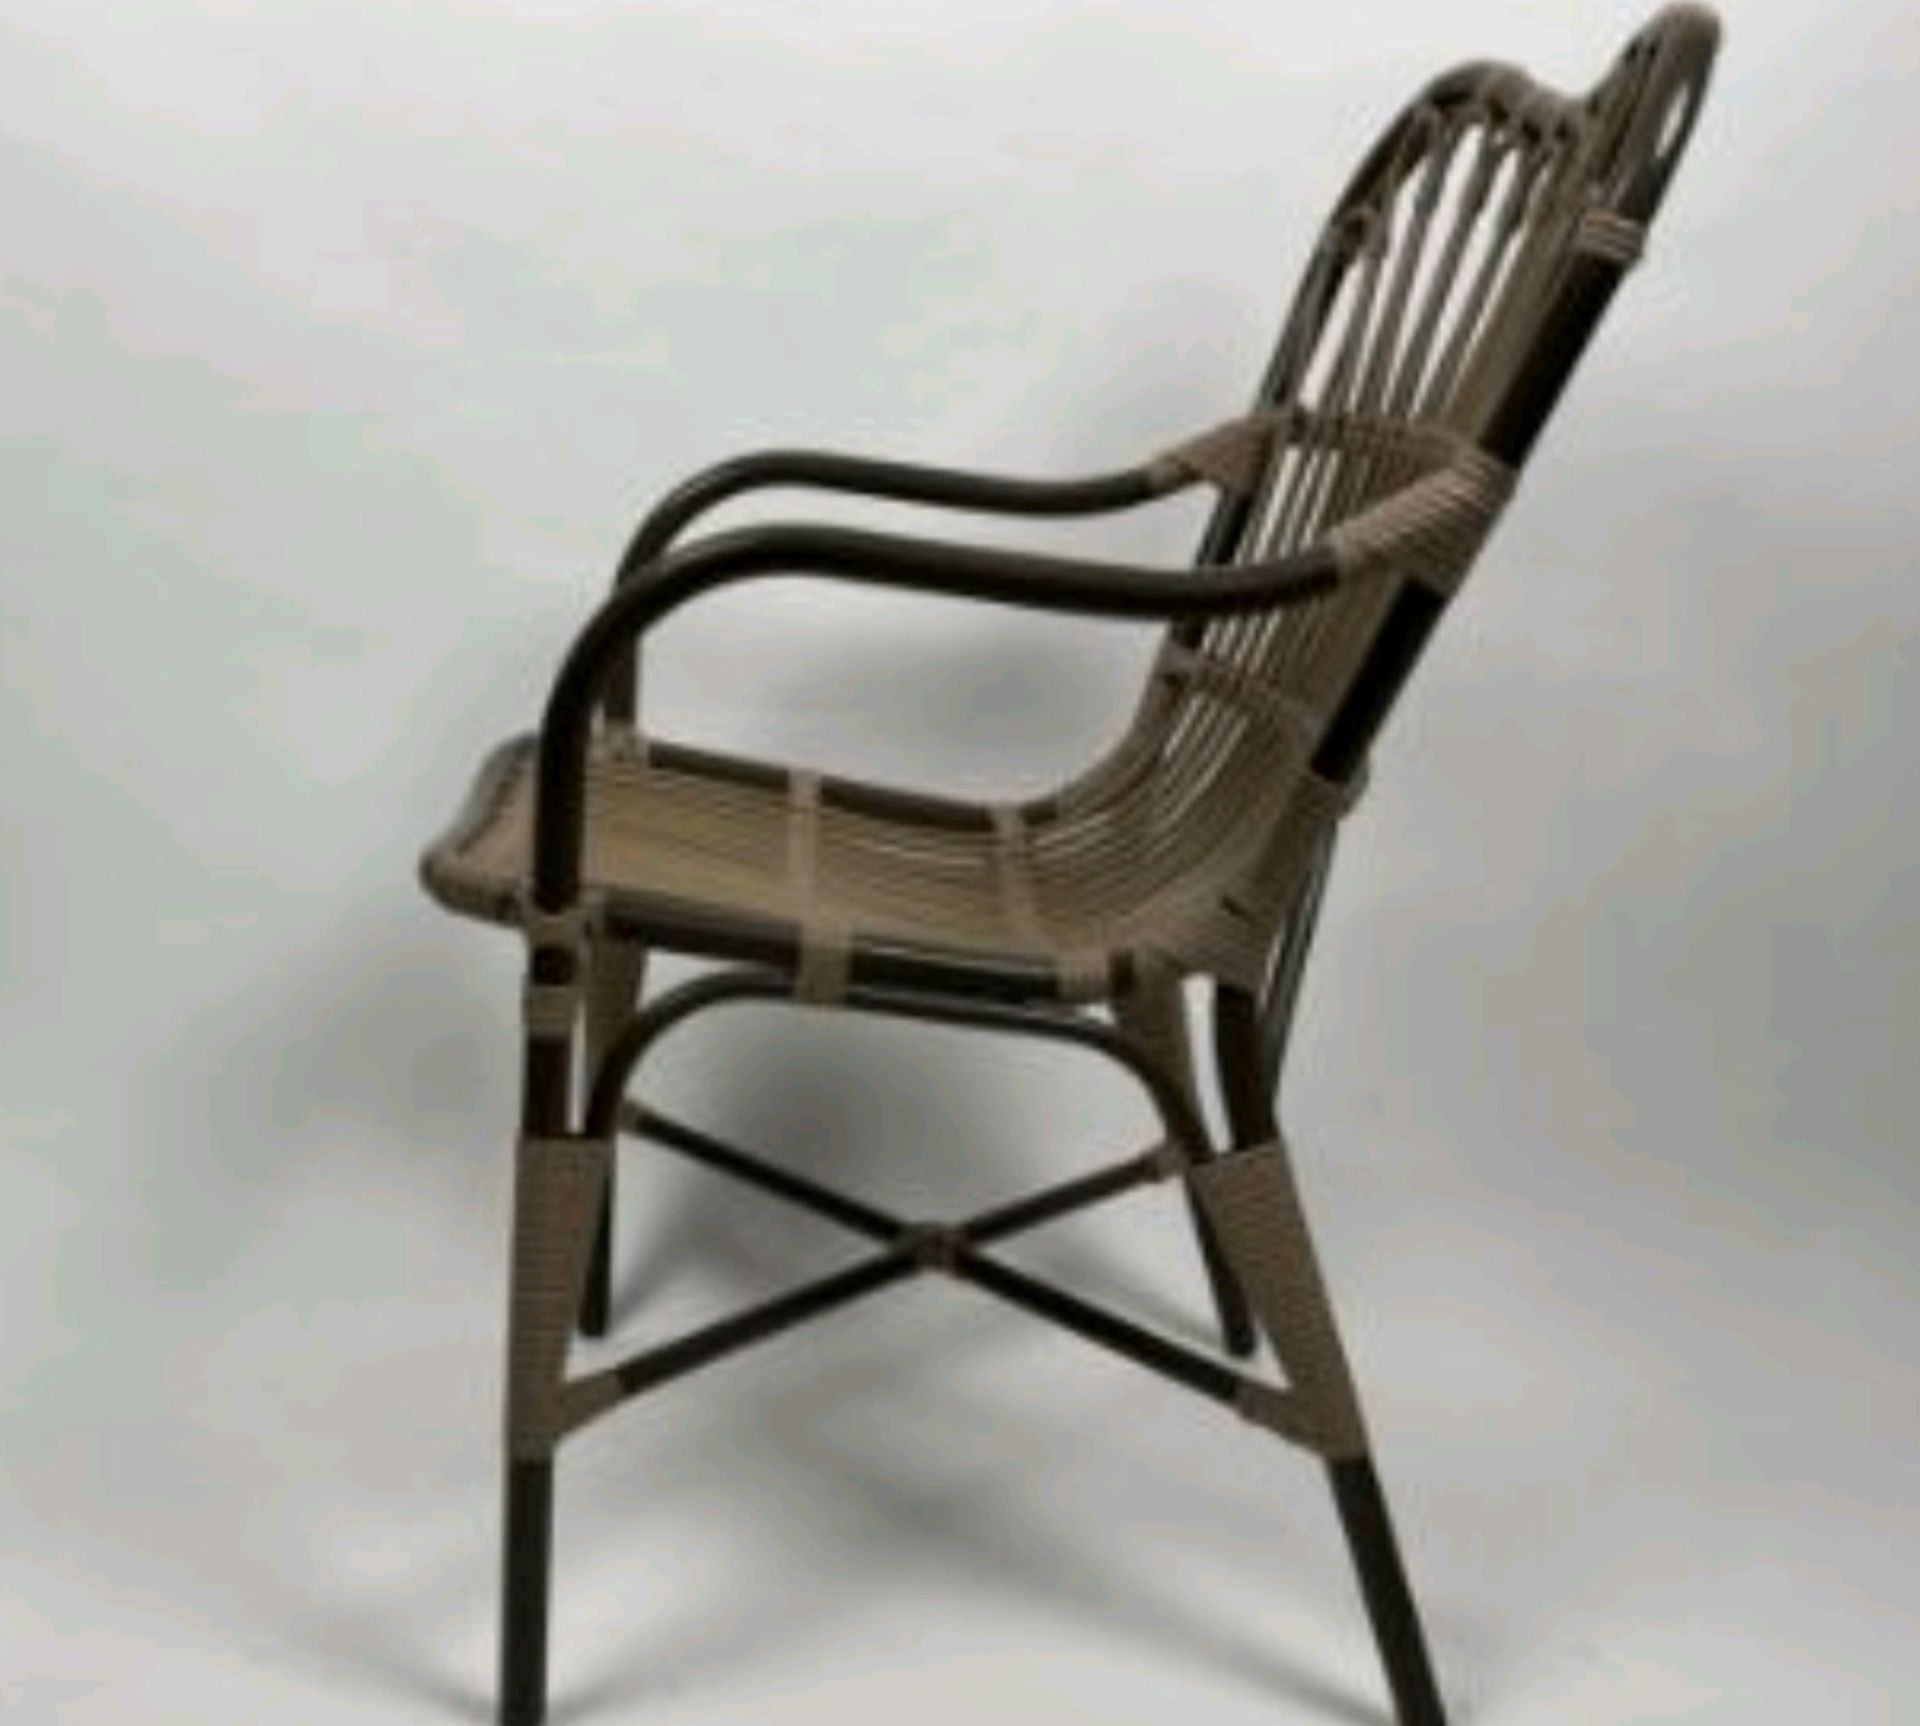 Sika-Design Margret Outdoor Rattan Dining Chair - Image 3 of 3